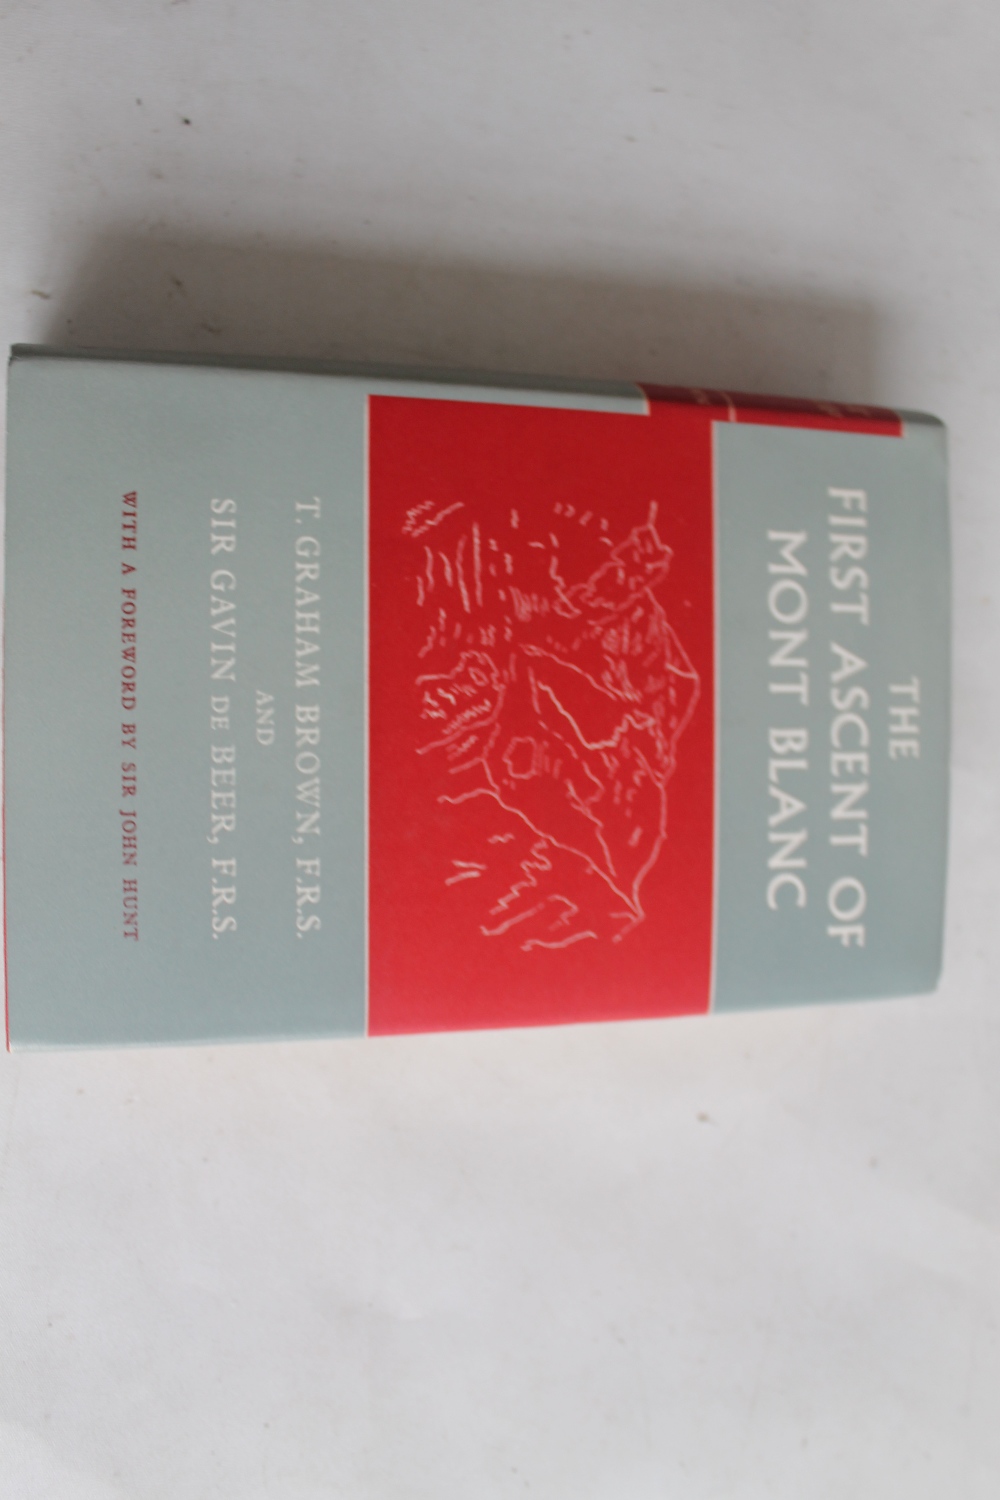 T. GRAHAM BROWN & SIR GAVIN DE BEER - 'THE FIRST ASCENT OF MONT BLANC', OUP 1957 first edition in d - Image 2 of 8